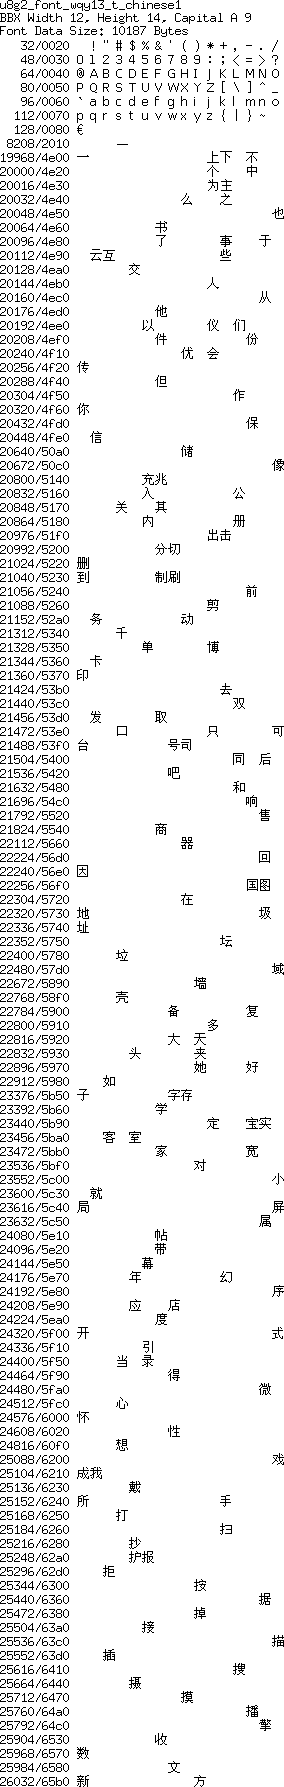 fntpic/u8g2_font_wqy13_t_chinese1.png